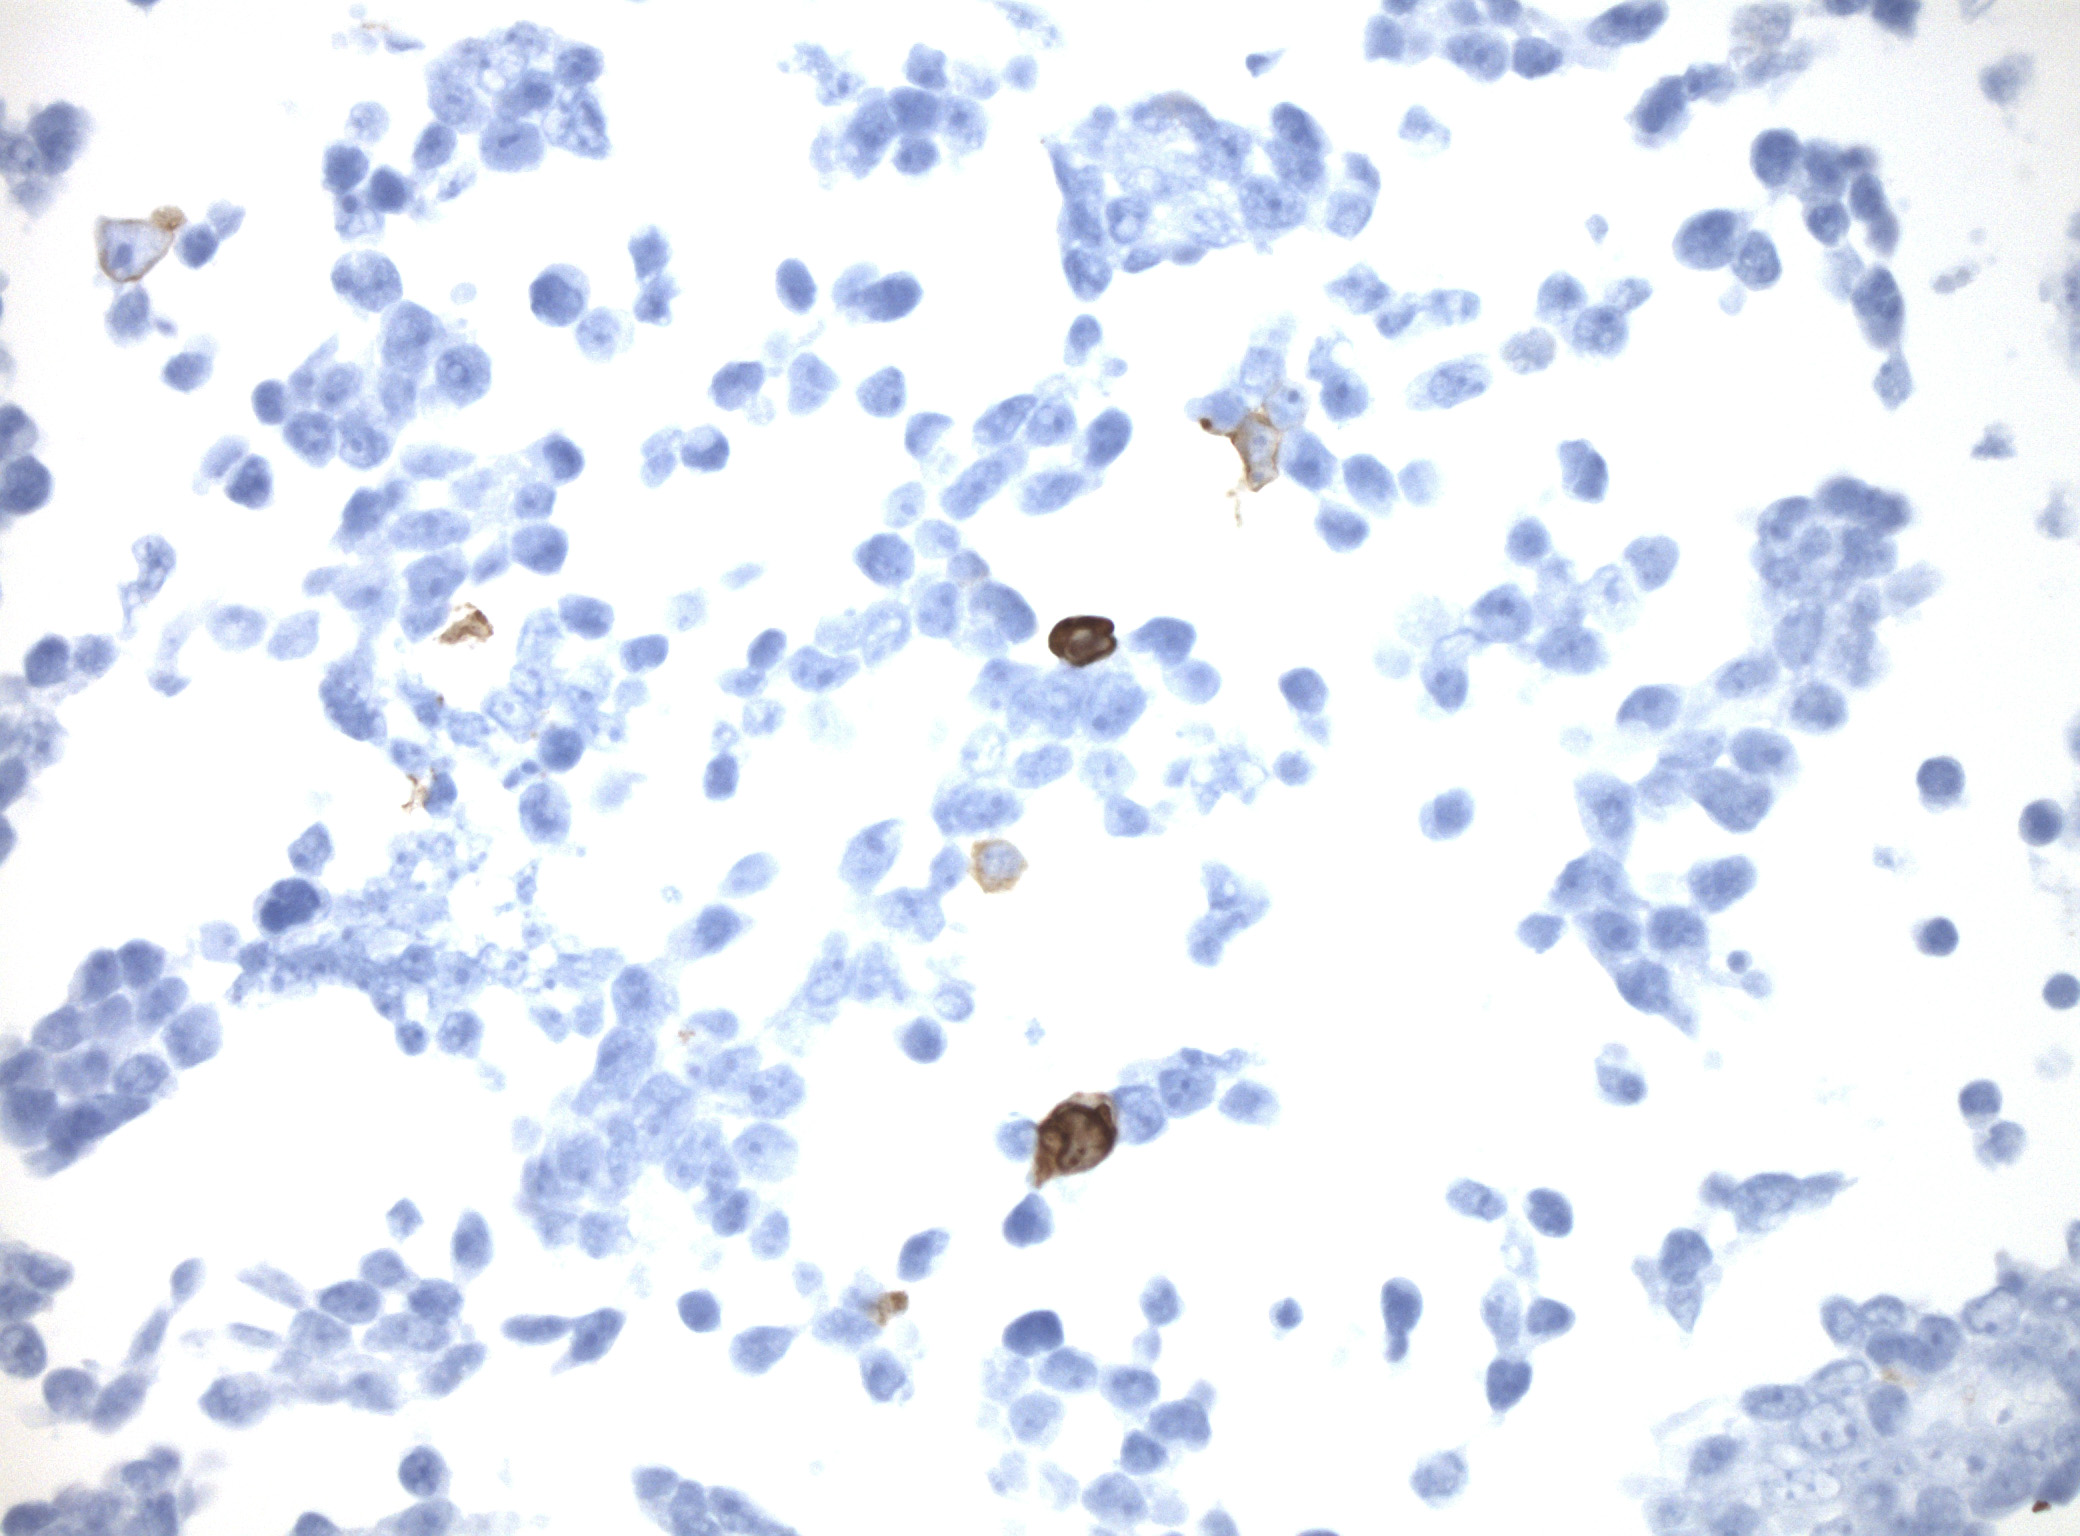 Immunohistology staining on PCDHGB7 overexpressed cytosection TS422084P5 with rabbit anti DDK clone OTIR5G2 C/N TA592569 at 1:2000 dilution 20m RT. Antibody staining was achieved with HIER Citrate pH6 , Polink1 with DAB chromogen detection kit (D11-18). Positive stain shown with the brown chromogen present. HEK293T cells were transfected with cDNA clone RC222084, 5 micron sections, 40x magnification